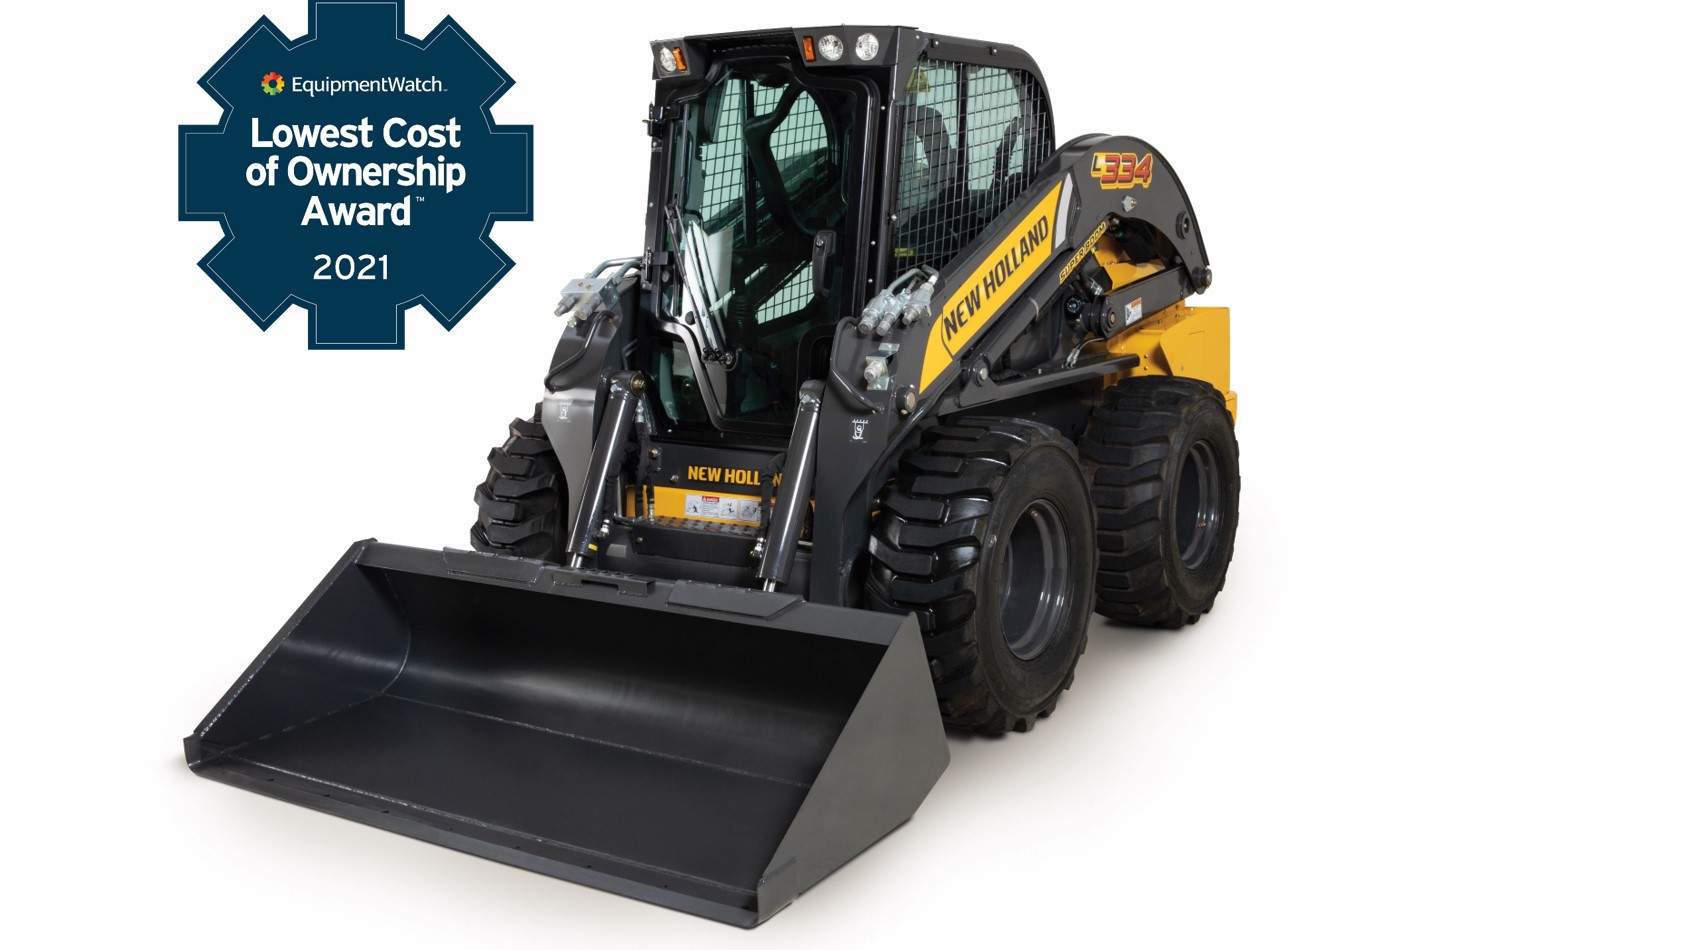 New Holland skid steer wins Lowest Cost of Ownership award